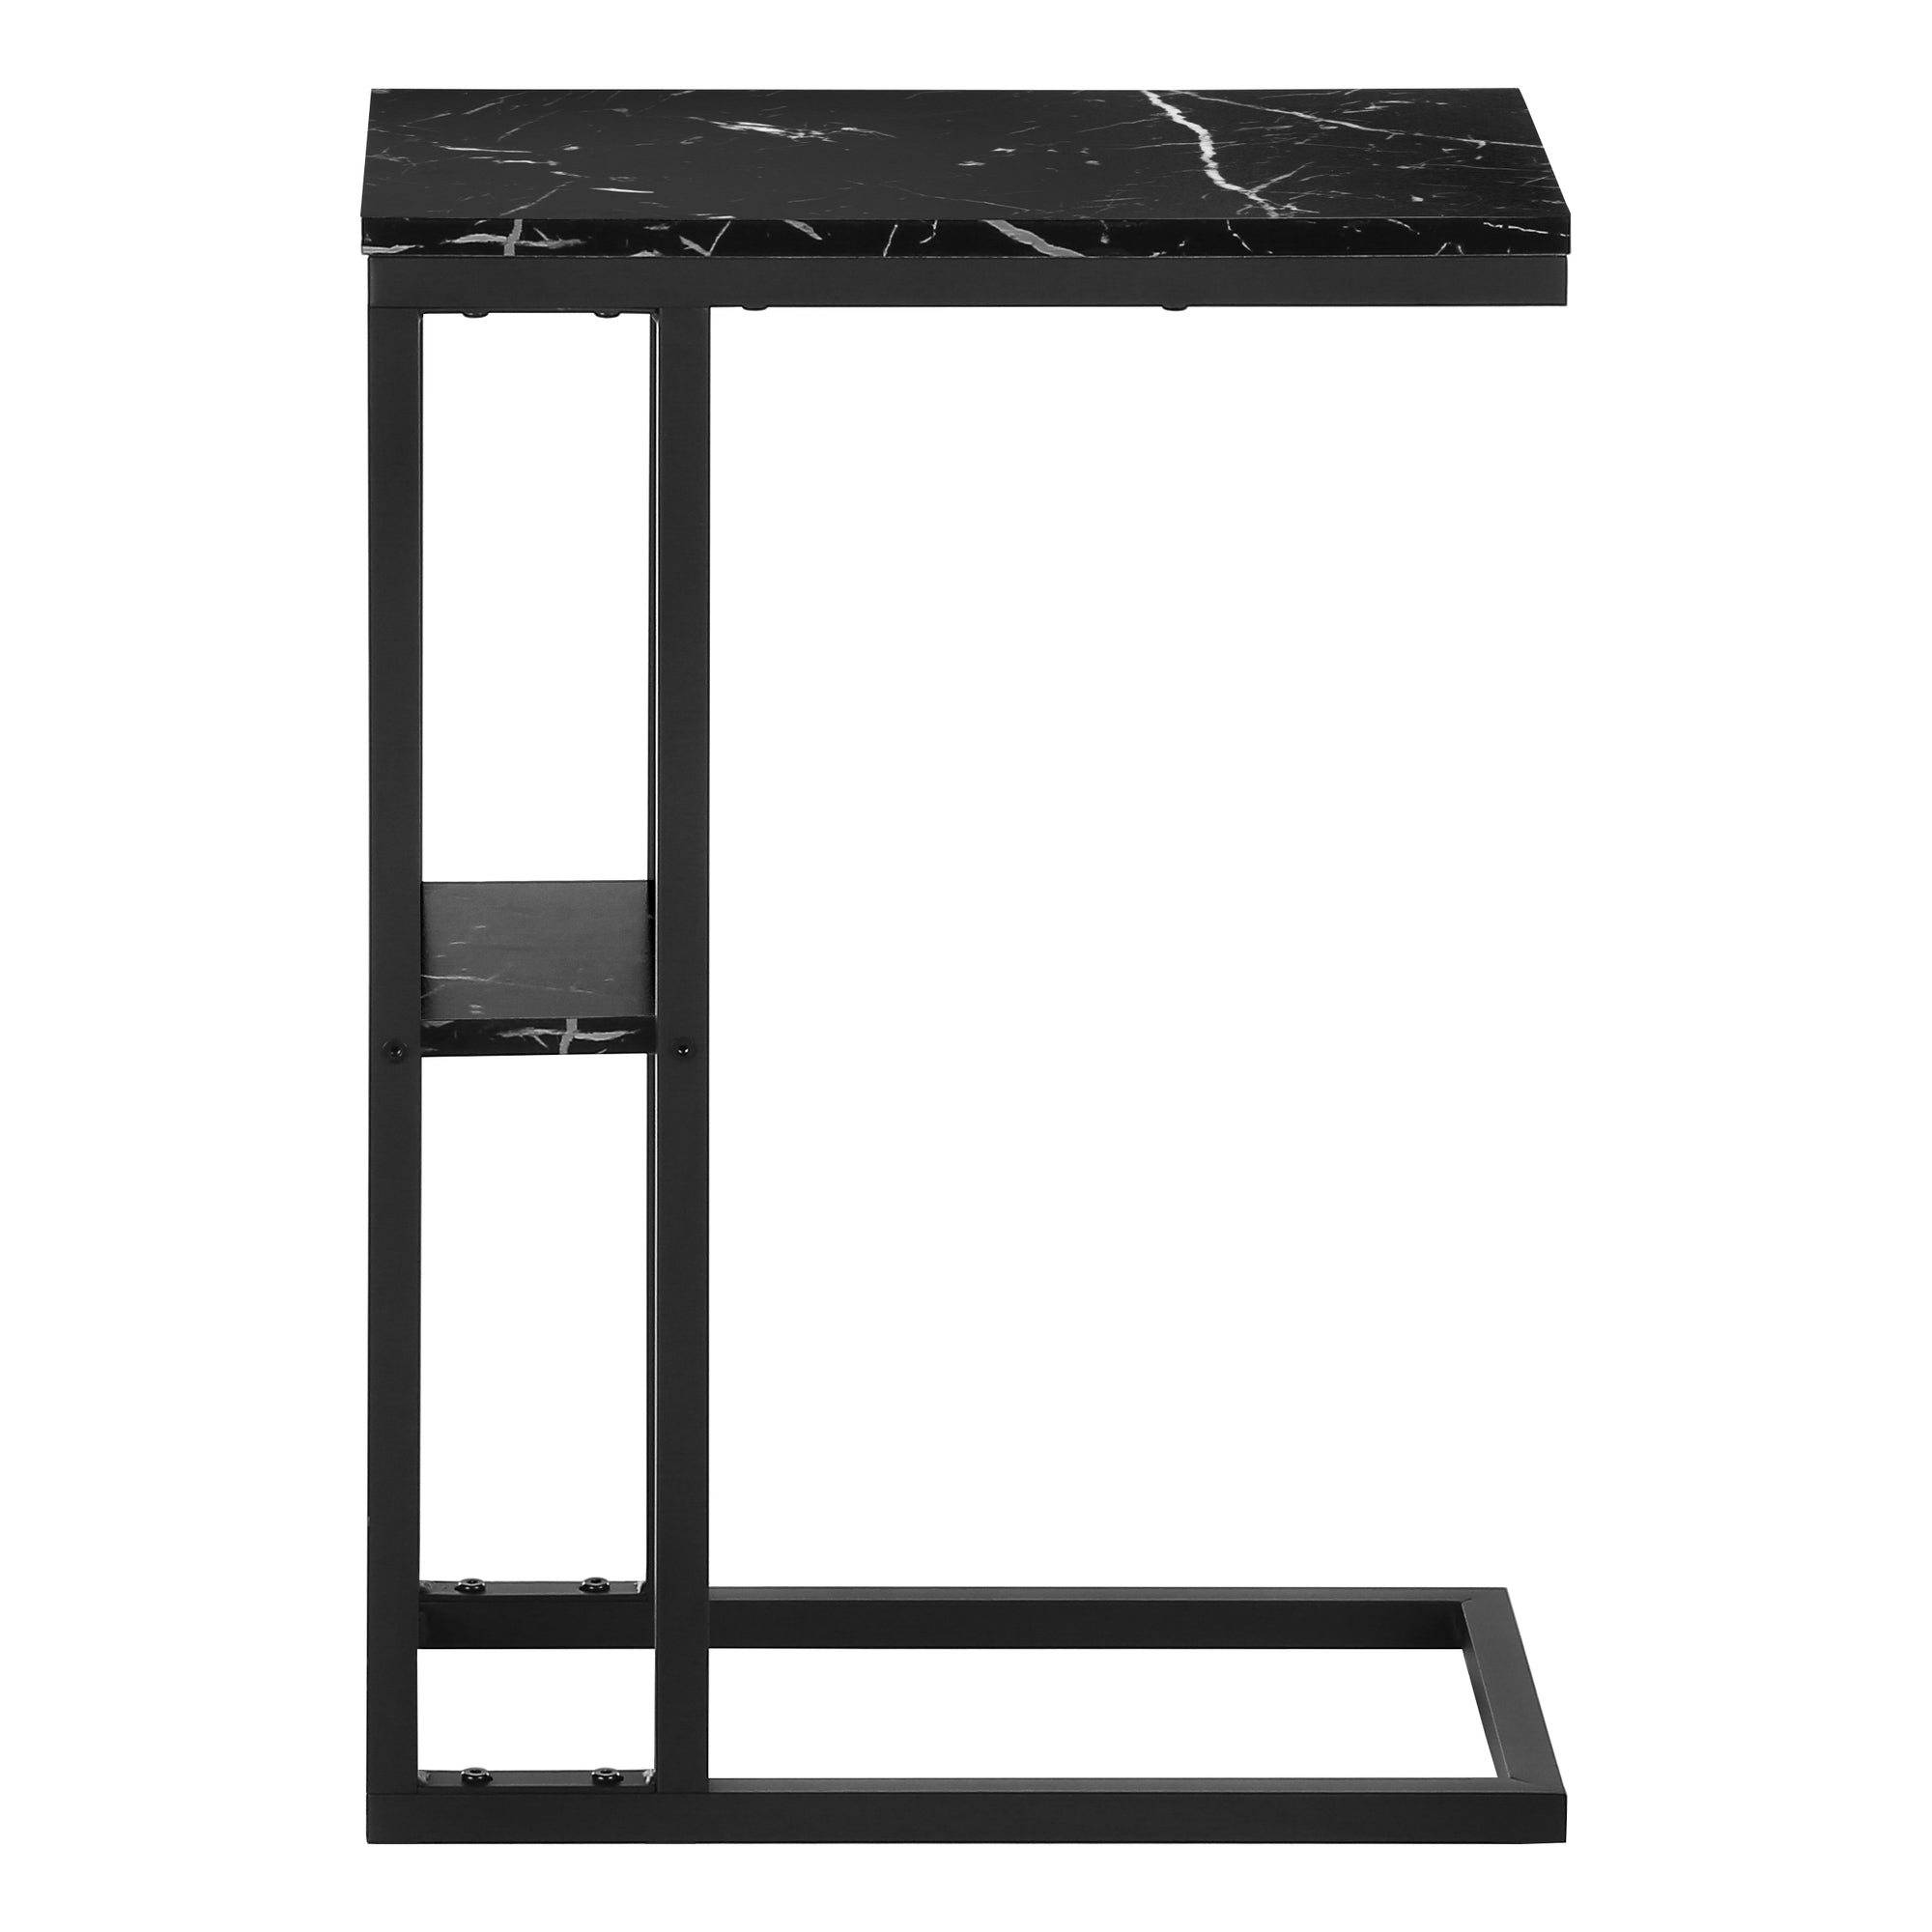 MN-203674    Accent Table, C-Shaped, End, Side, Snack, Living Room, Bedroom, Metal Legs, Laminate, Black Marble-Look, Black, Contemporary, Modern